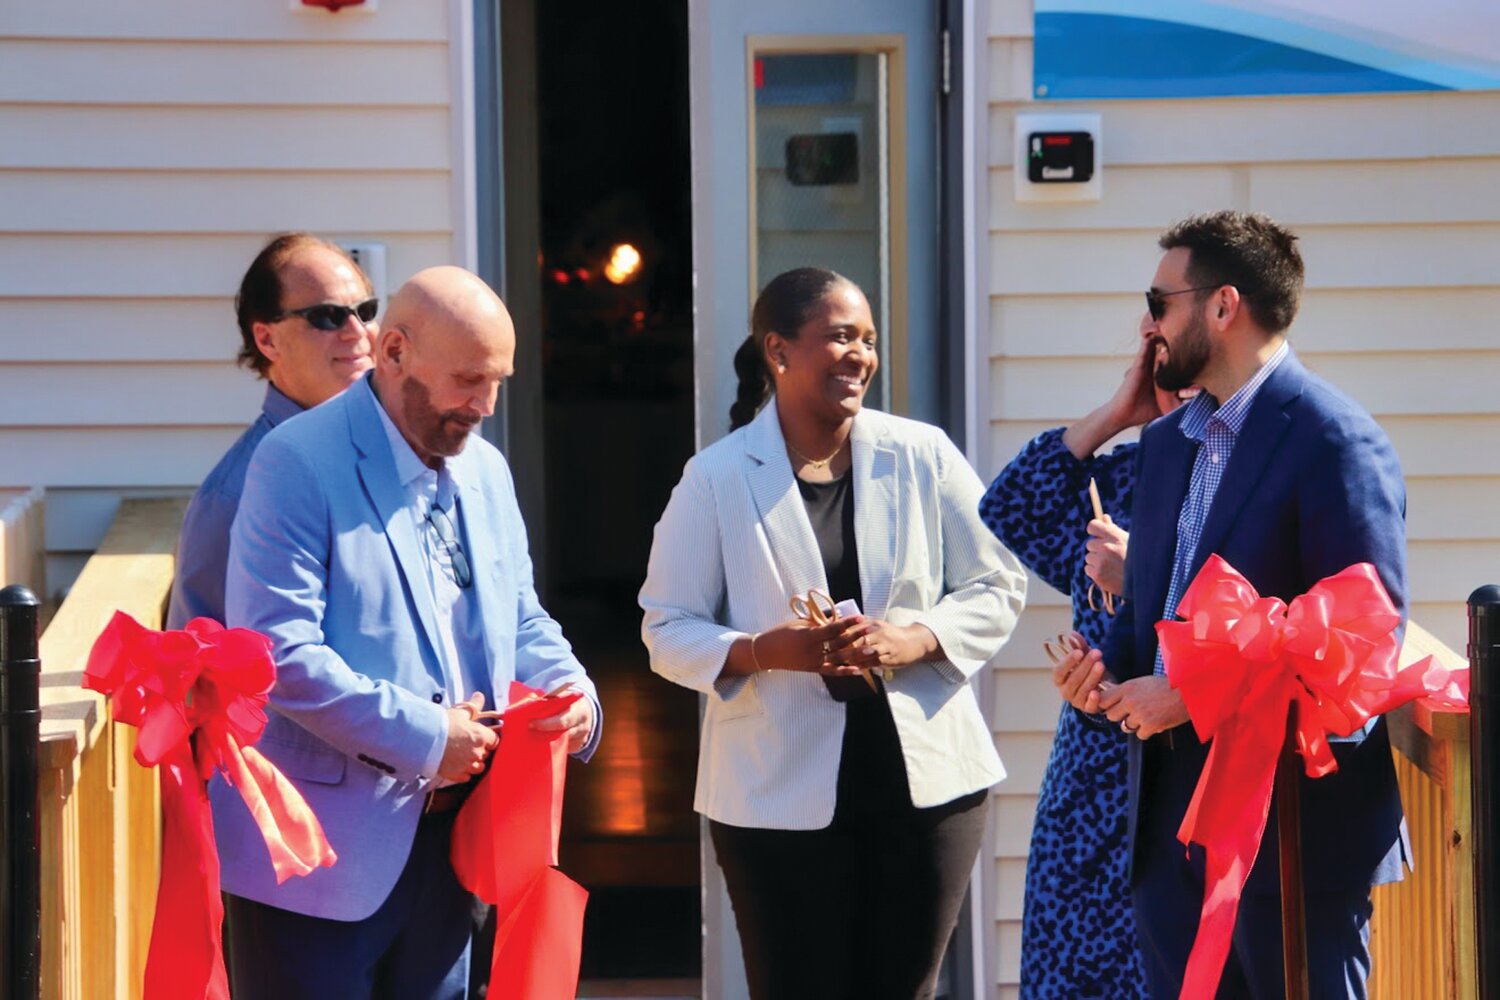 HEZ DISPENSER: Tri-County Community Action Agency snipped the ribbon on a new Health Equity Zone (HEZ) Community Center at 104 Greenville Ave. in Johnston. From left to right, Tri-County President and CEO Joseph DeSantis, Johnston Town Council member Alfred T. Carnevale, Nadine Tavares, lead HEZ initiative project officer with the Rhode Island Department of Health, HEZ Director Lisa Kennedy, and Johnston Mayor Joseph Polisena Jr. helped cut the ribbon on the new center. (Photos courtesy Tri-County)